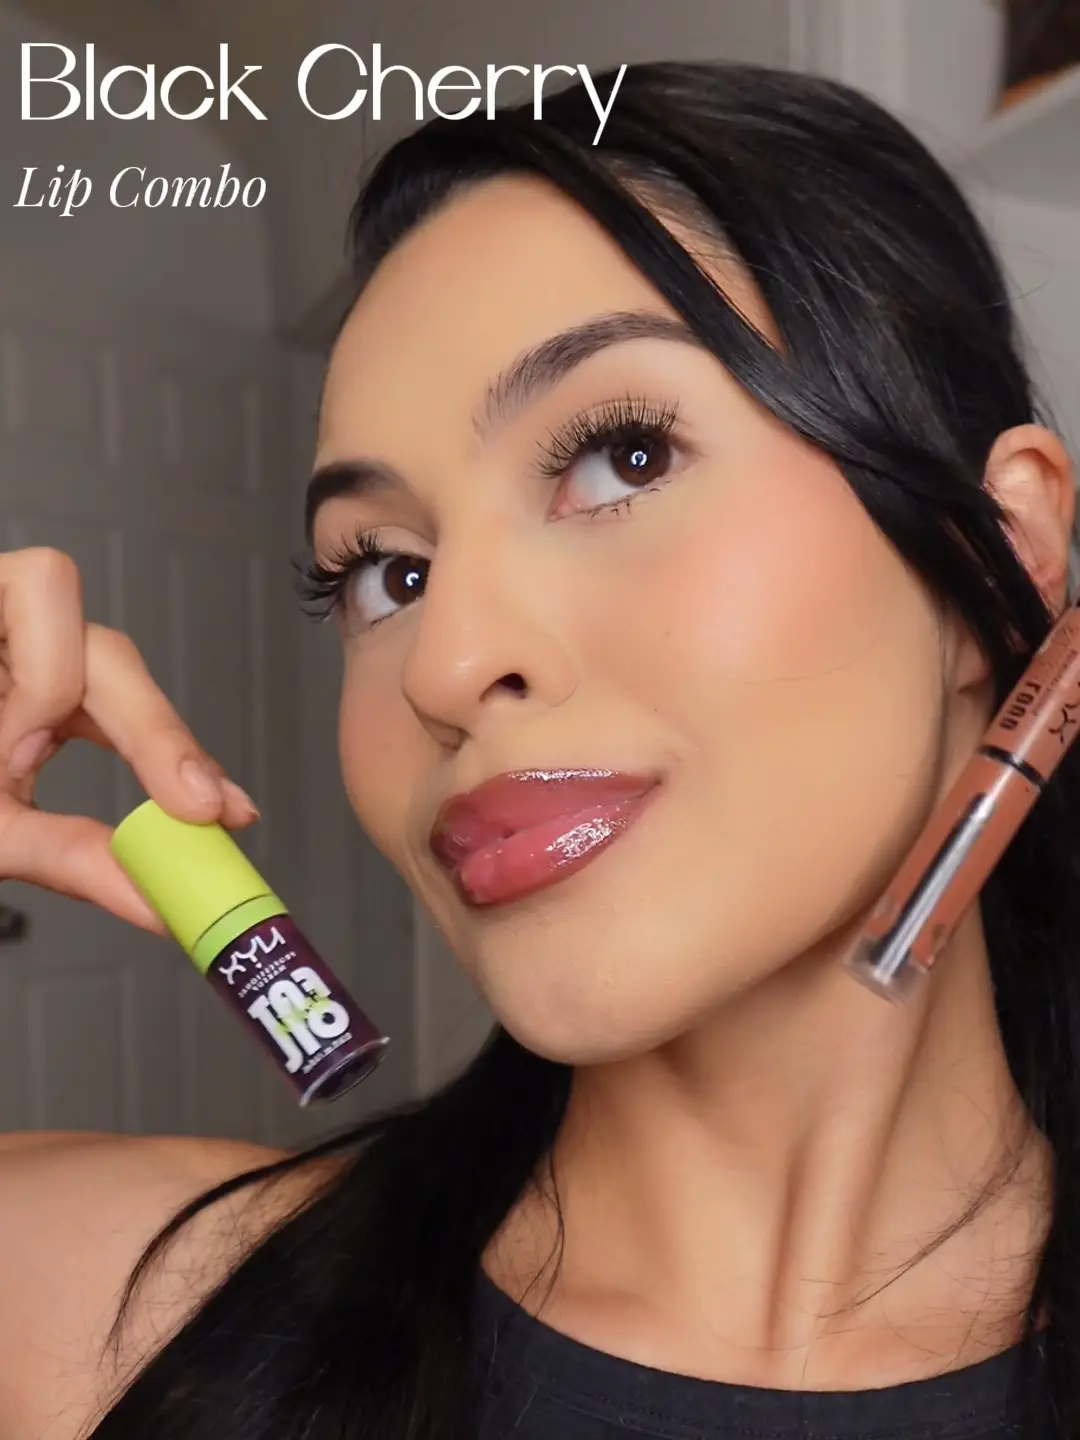 Black Cherry Lip Combo 🍒, Video published by lali